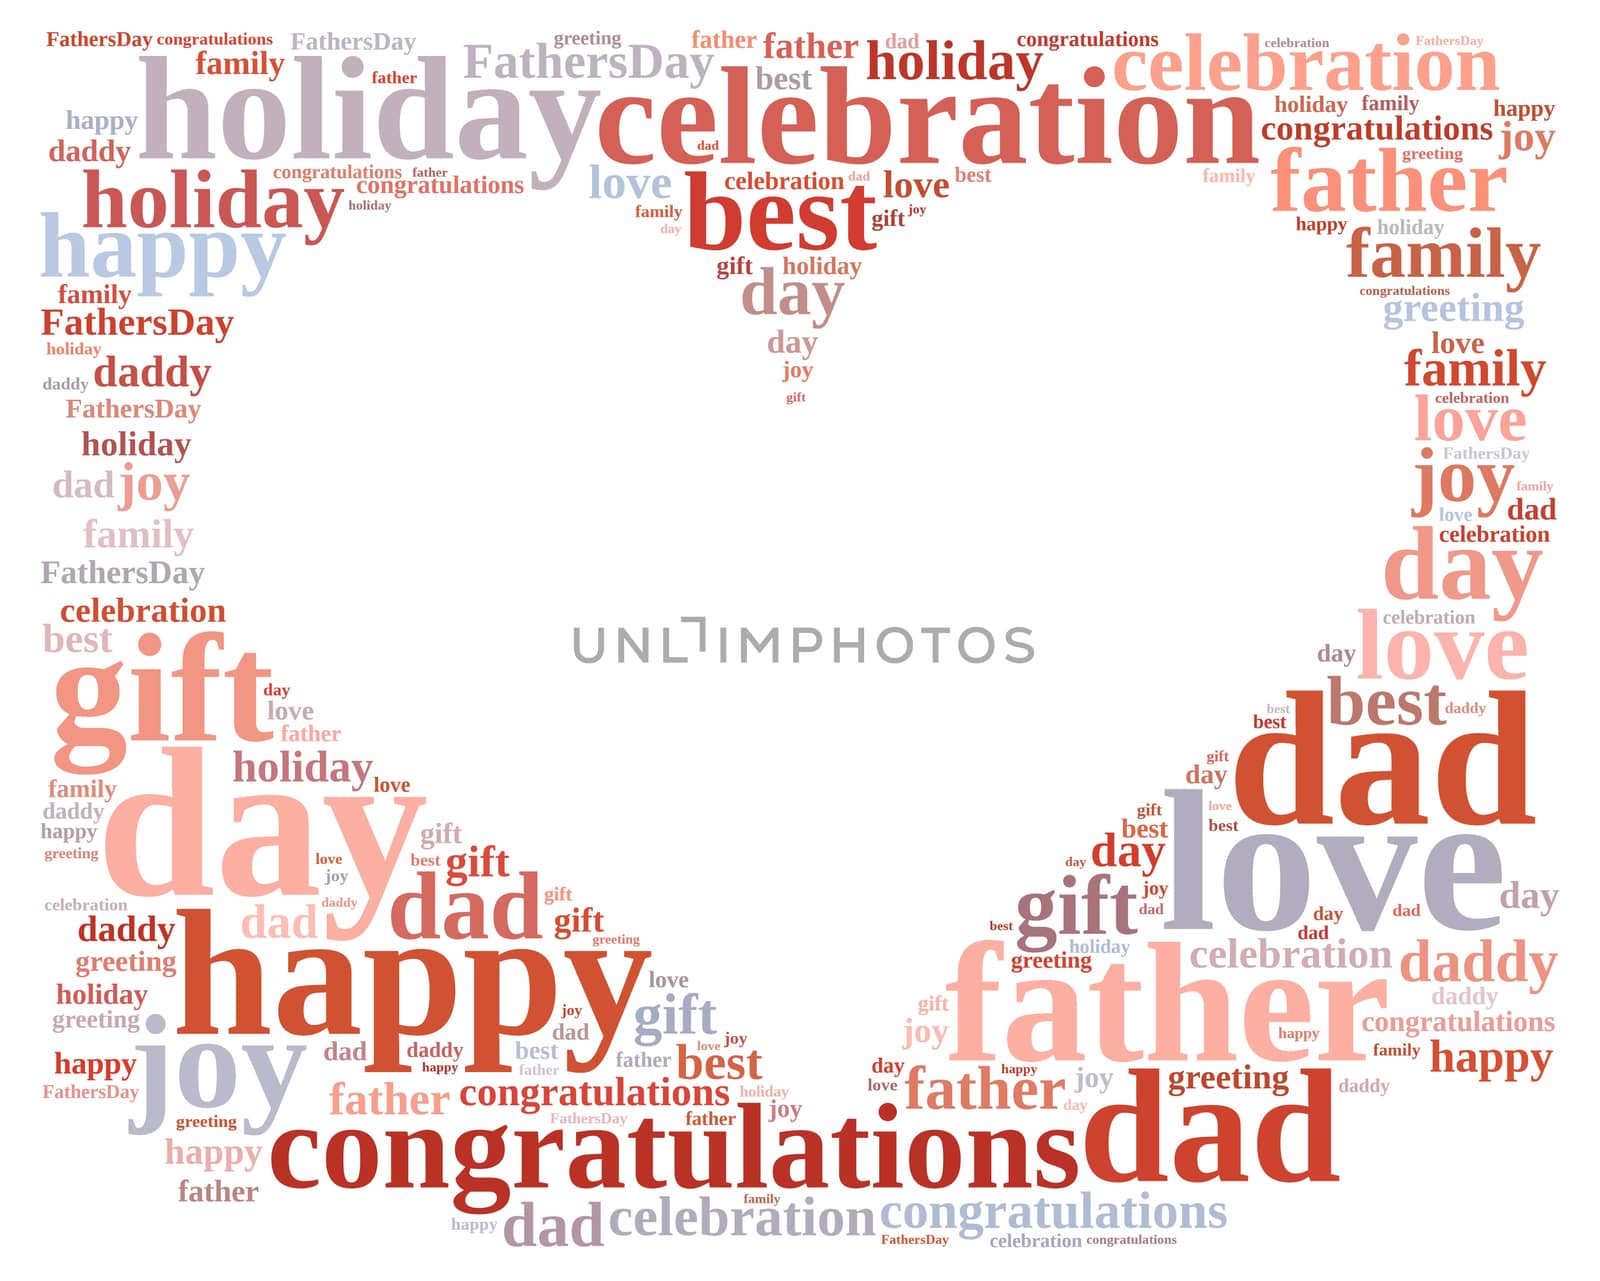 Illustration with word cloud about Fathers Day.